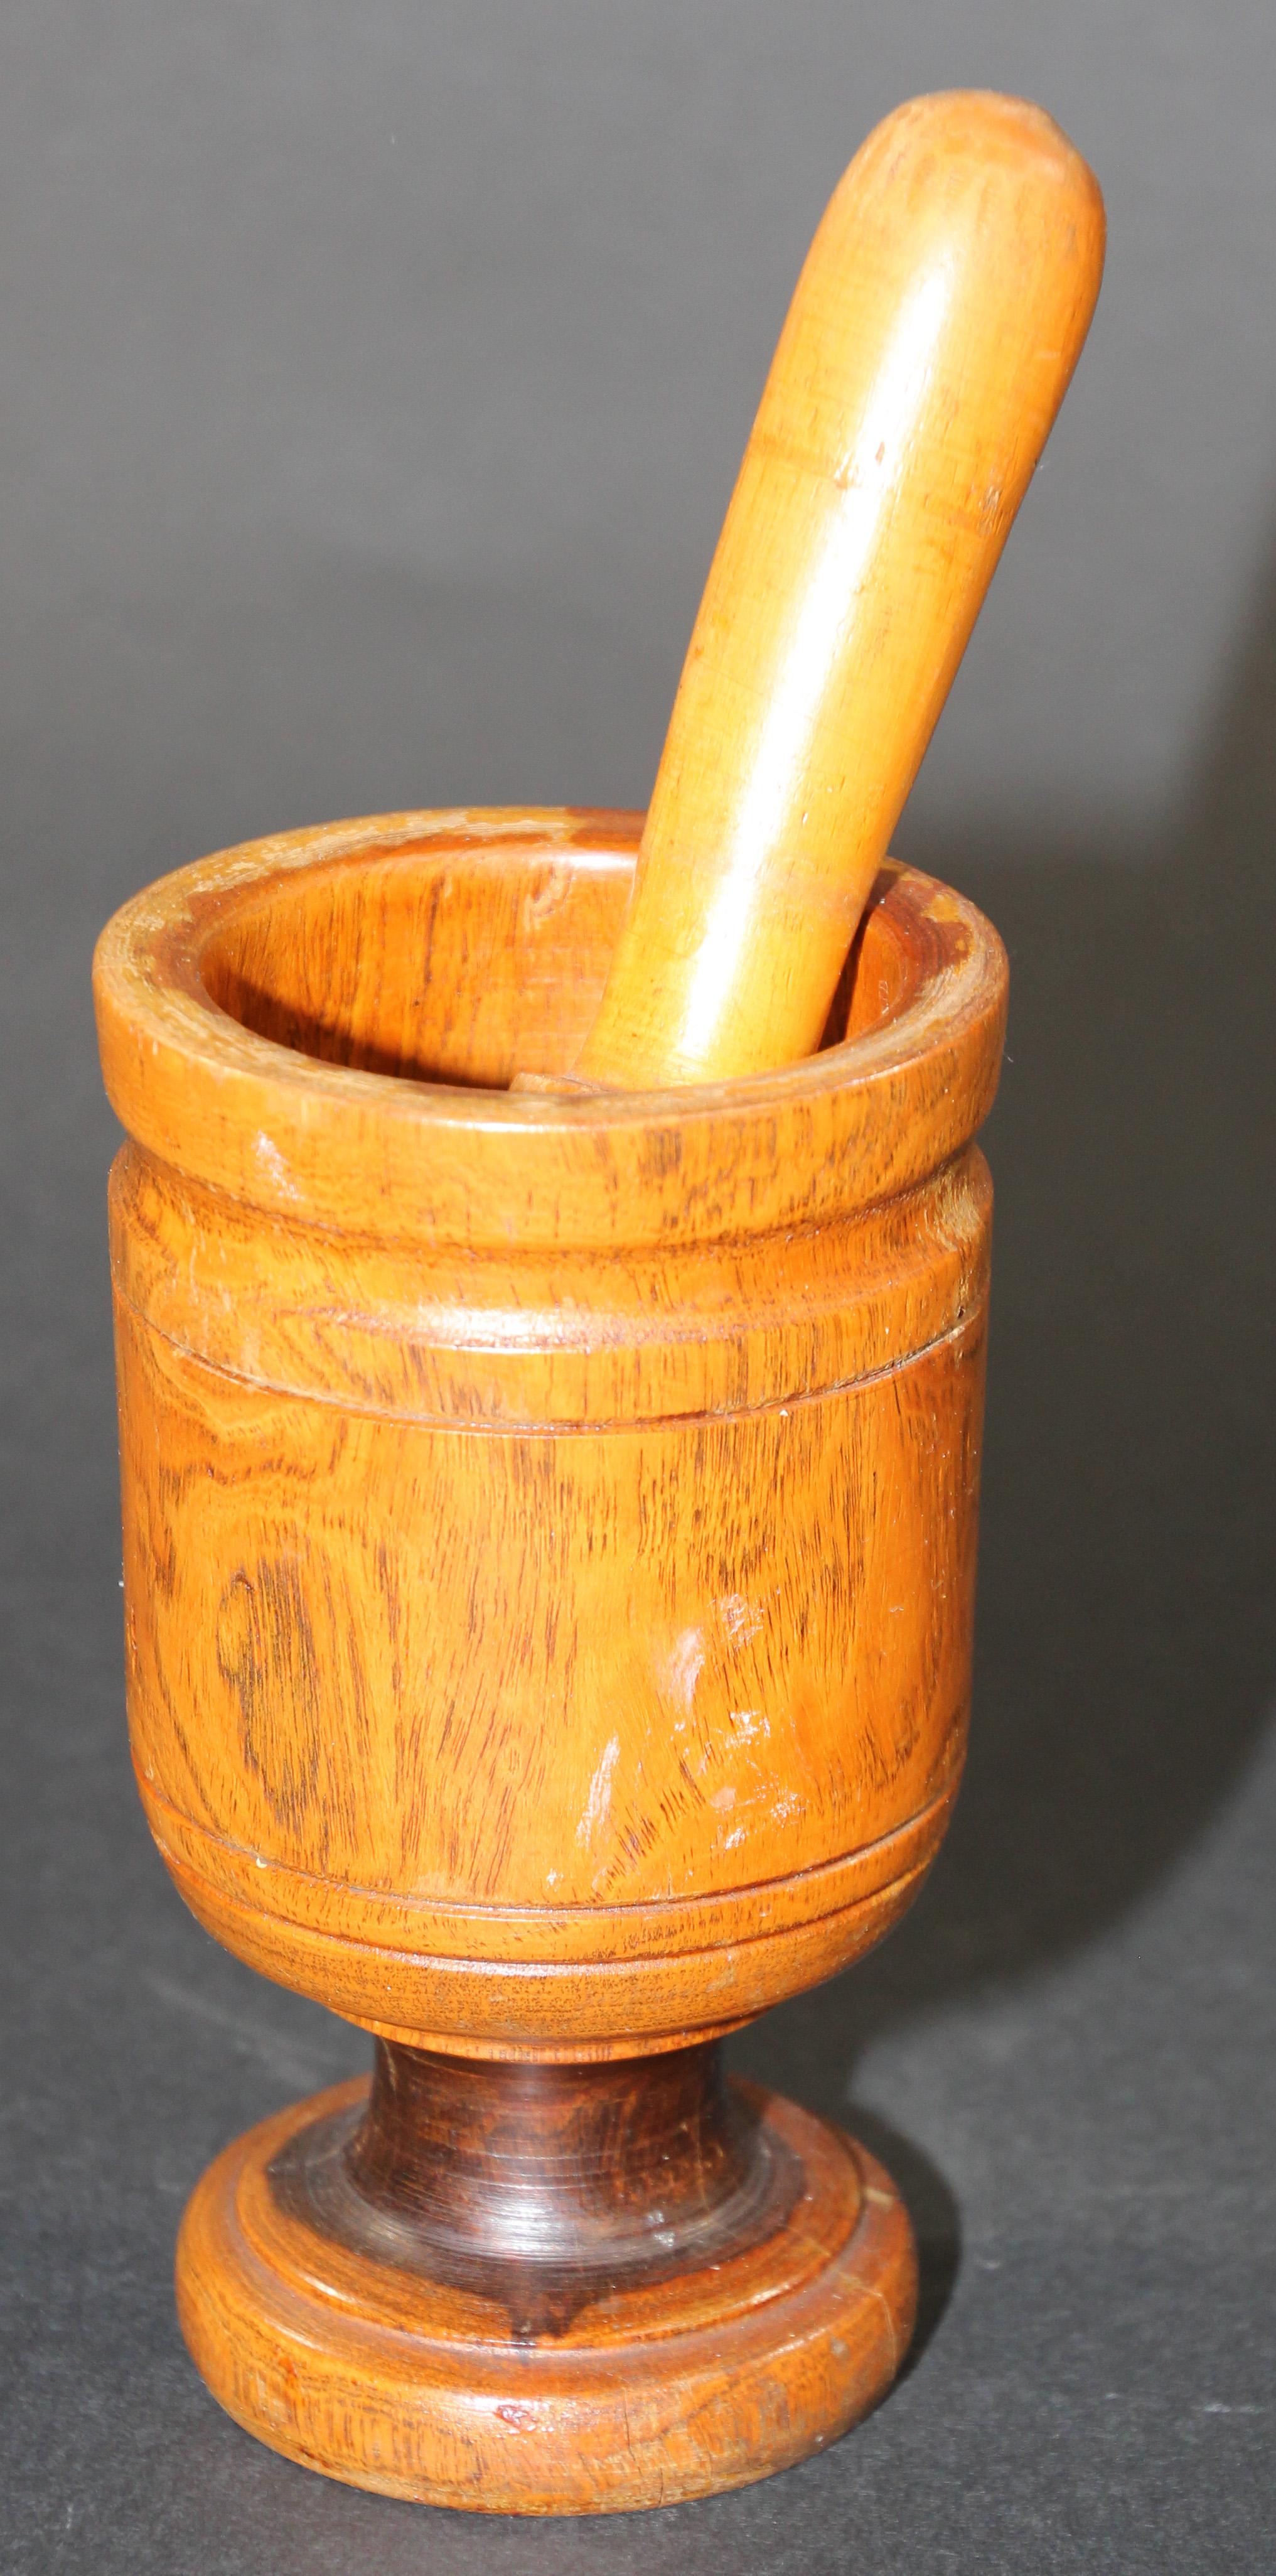 Vintage Wooden Mortar and Pestle, Italy In Good Condition For Sale In North Hollywood, CA